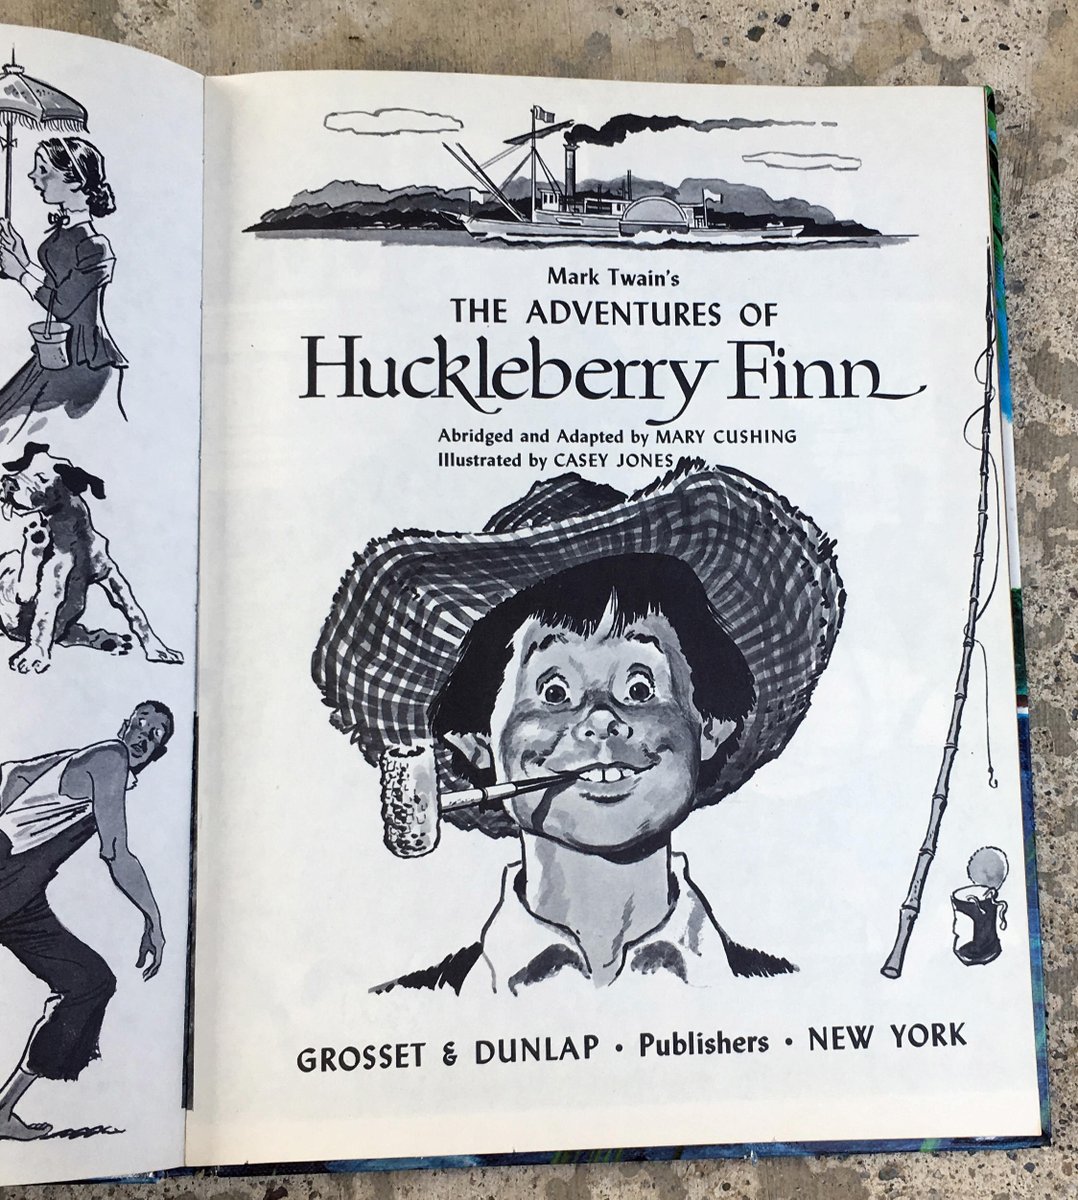 #etsy shop: Huckleberry Finn, Mark Twain, Abridged and Adapted by Mary Cushing, 1960s, #Illustrated etsy.me/2C8uwQY #bookshelf #book #children #illustratedbook #huckleberryfinn #marktwain #abridged #homeschool #childrensclassicbooks #marycushing #vintage